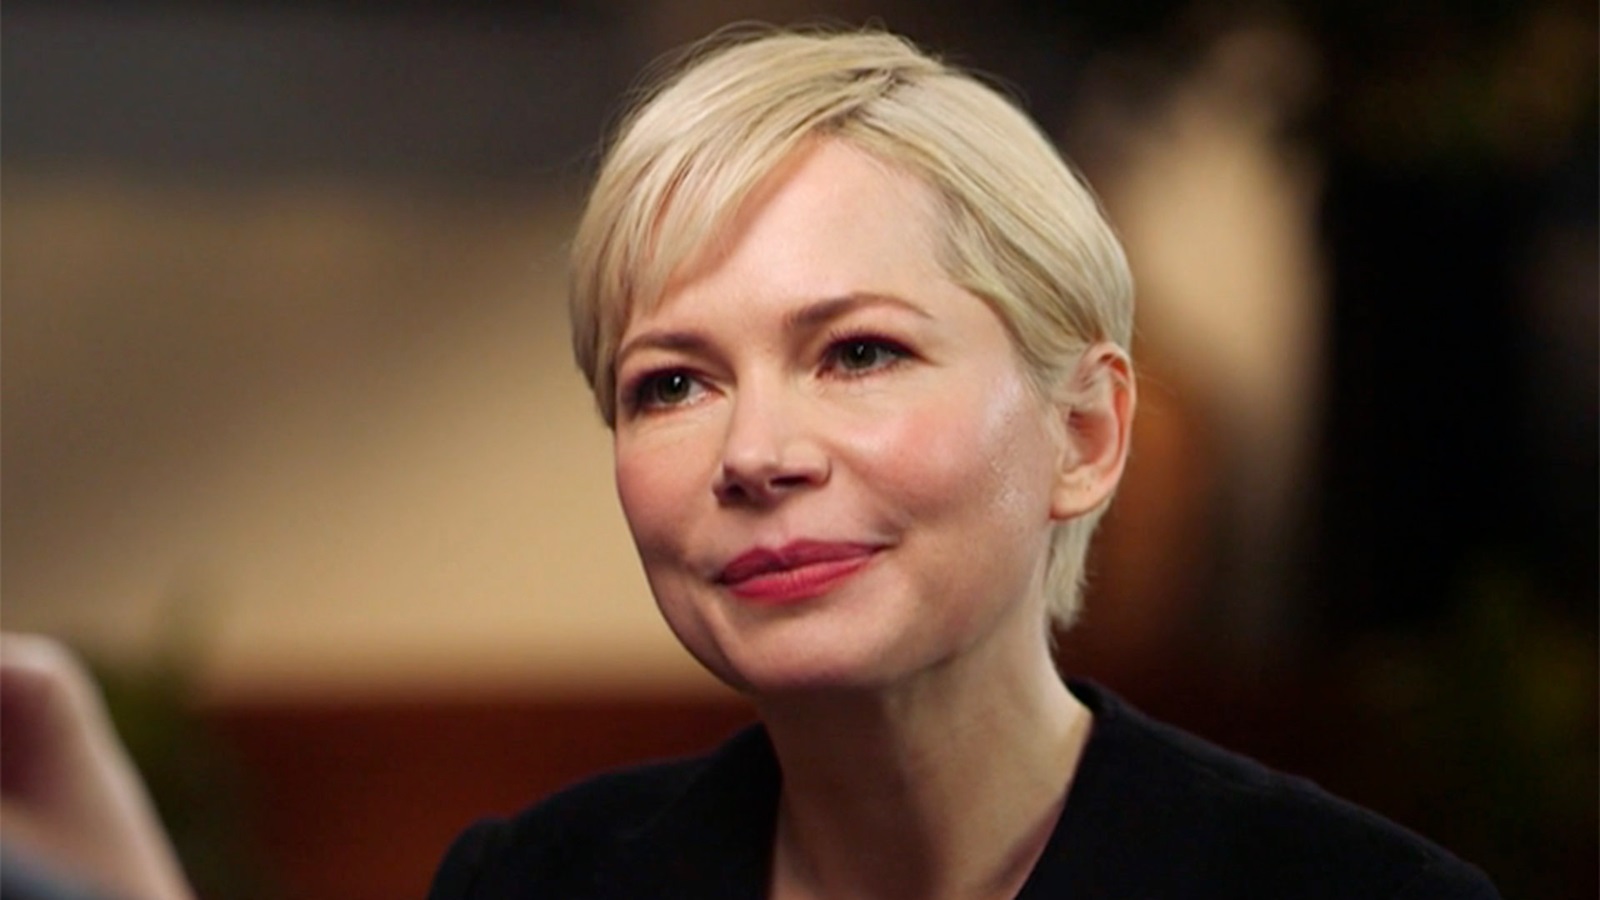 Michelle Williams will star and produce the miniseries Dying for Sex